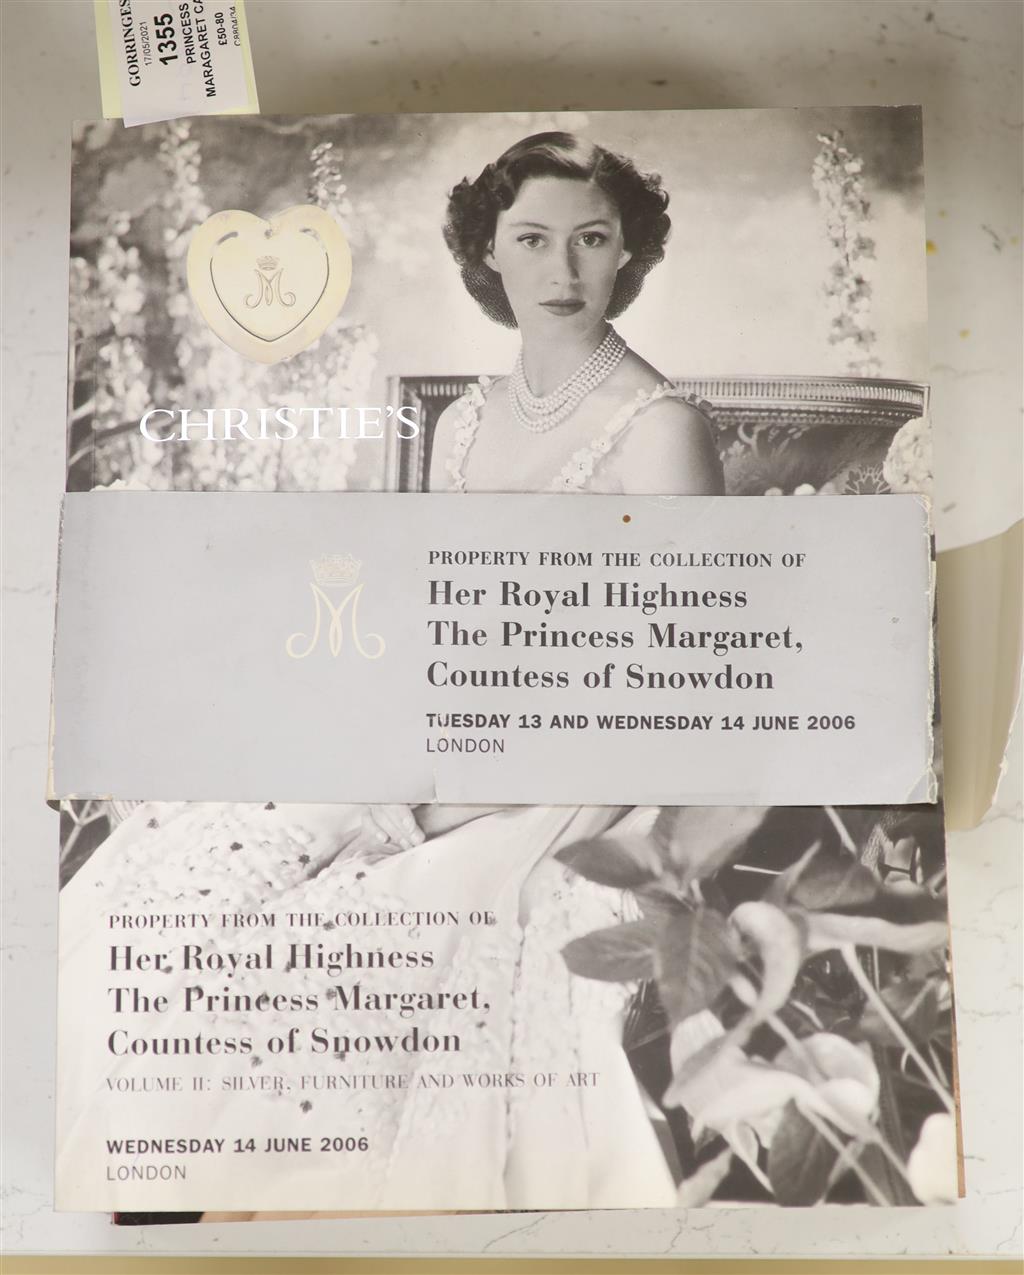 A Christies Princess Maragaret catalogue for the property of Her Royal Highness Princess Margaret, Countess of Snowden 14/06/2006